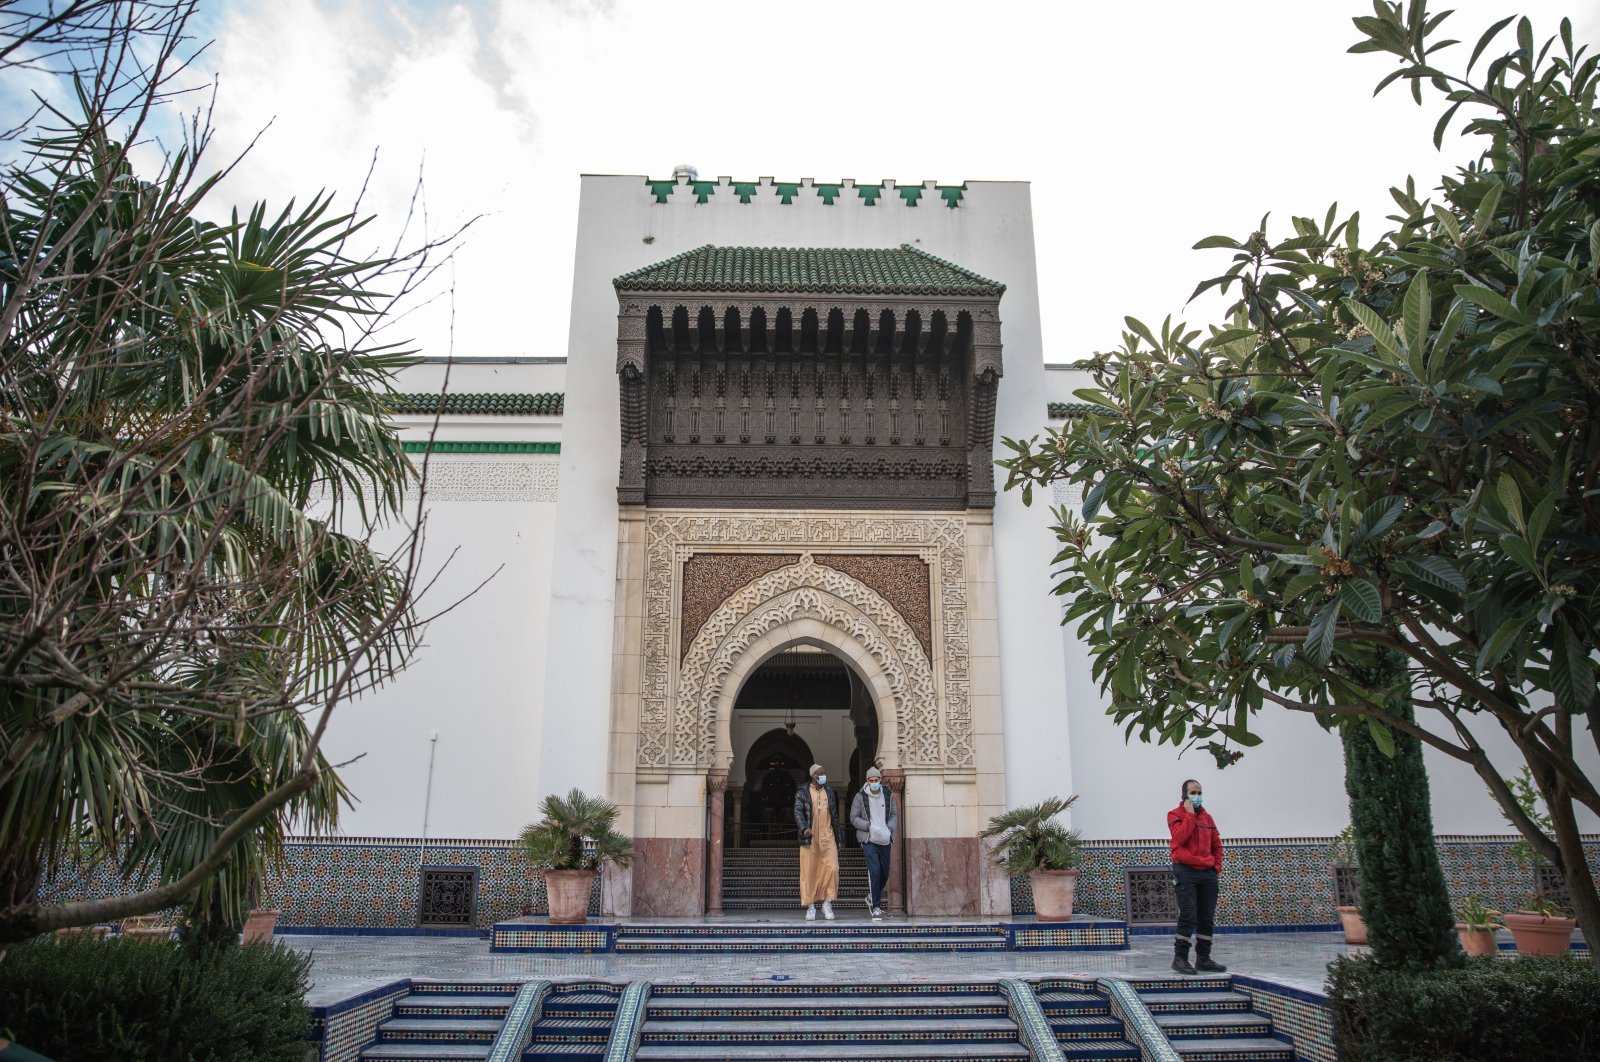 The entrance to the Paris Grand Mosque after Friday prayers, Paris, France, Dec. 11, 2020. (Photo by Getty Images)